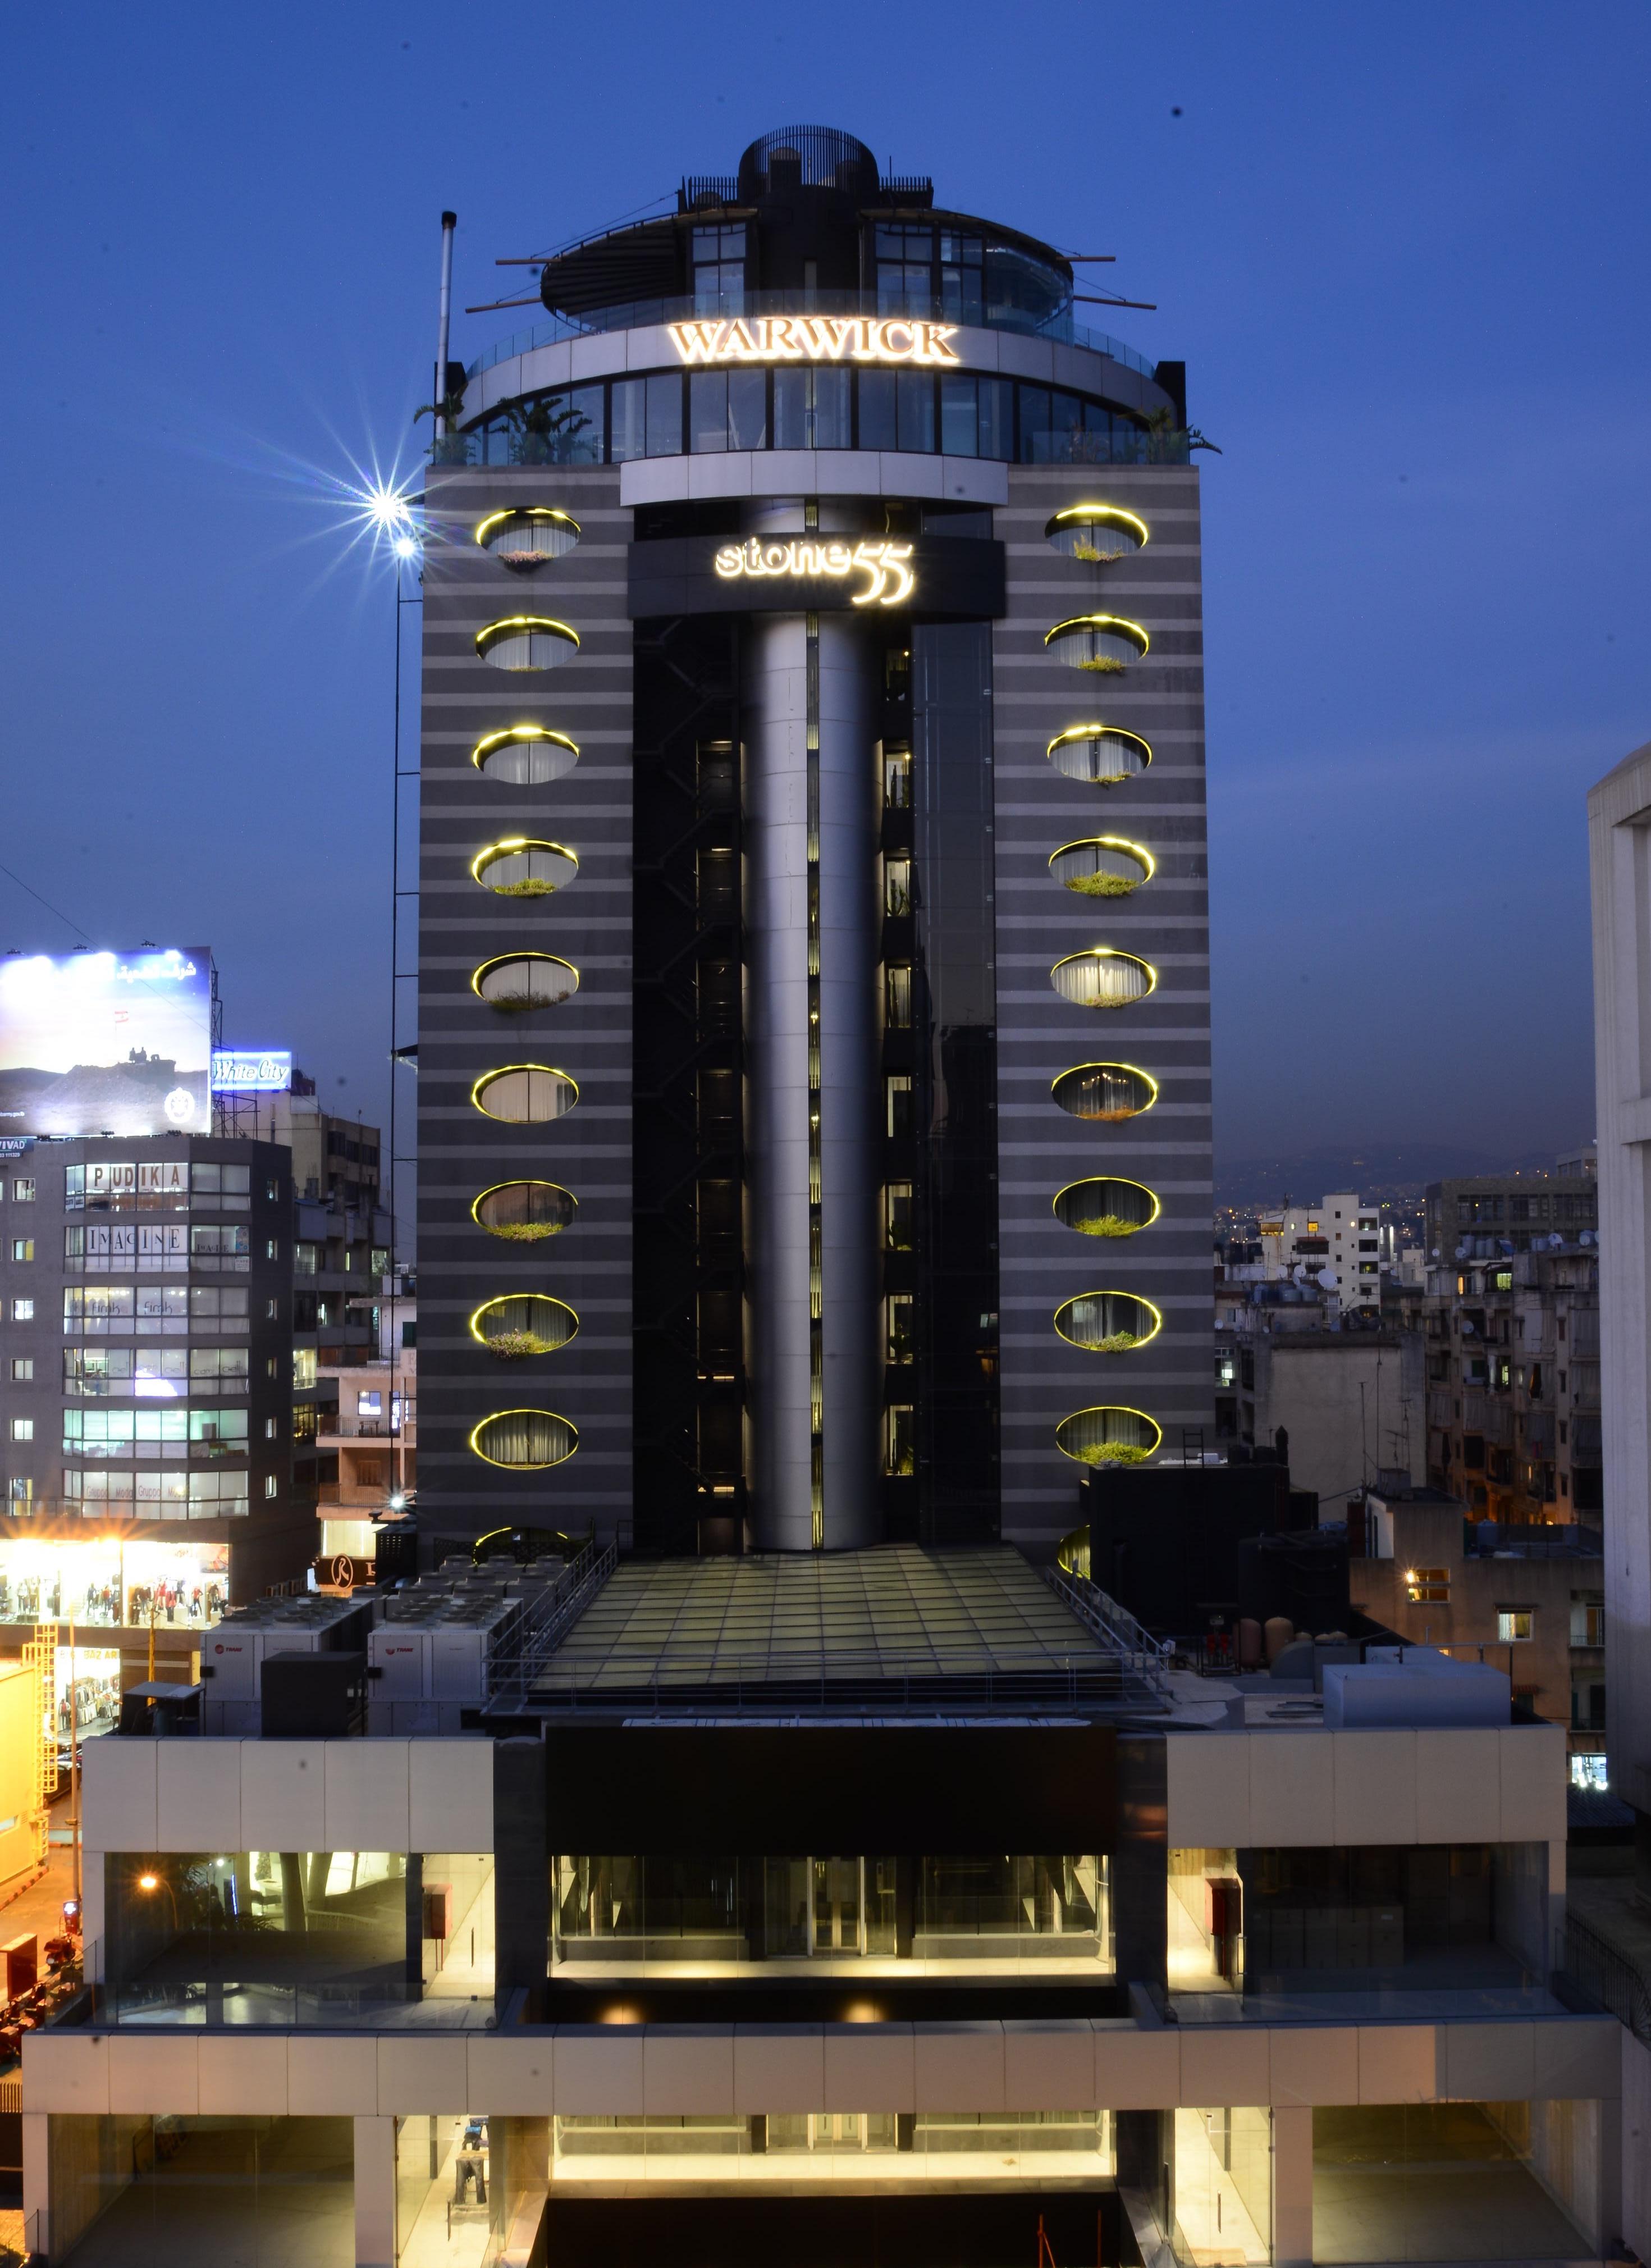 Warwick Stone 55 Hotel Beyrouth Extérieur photo